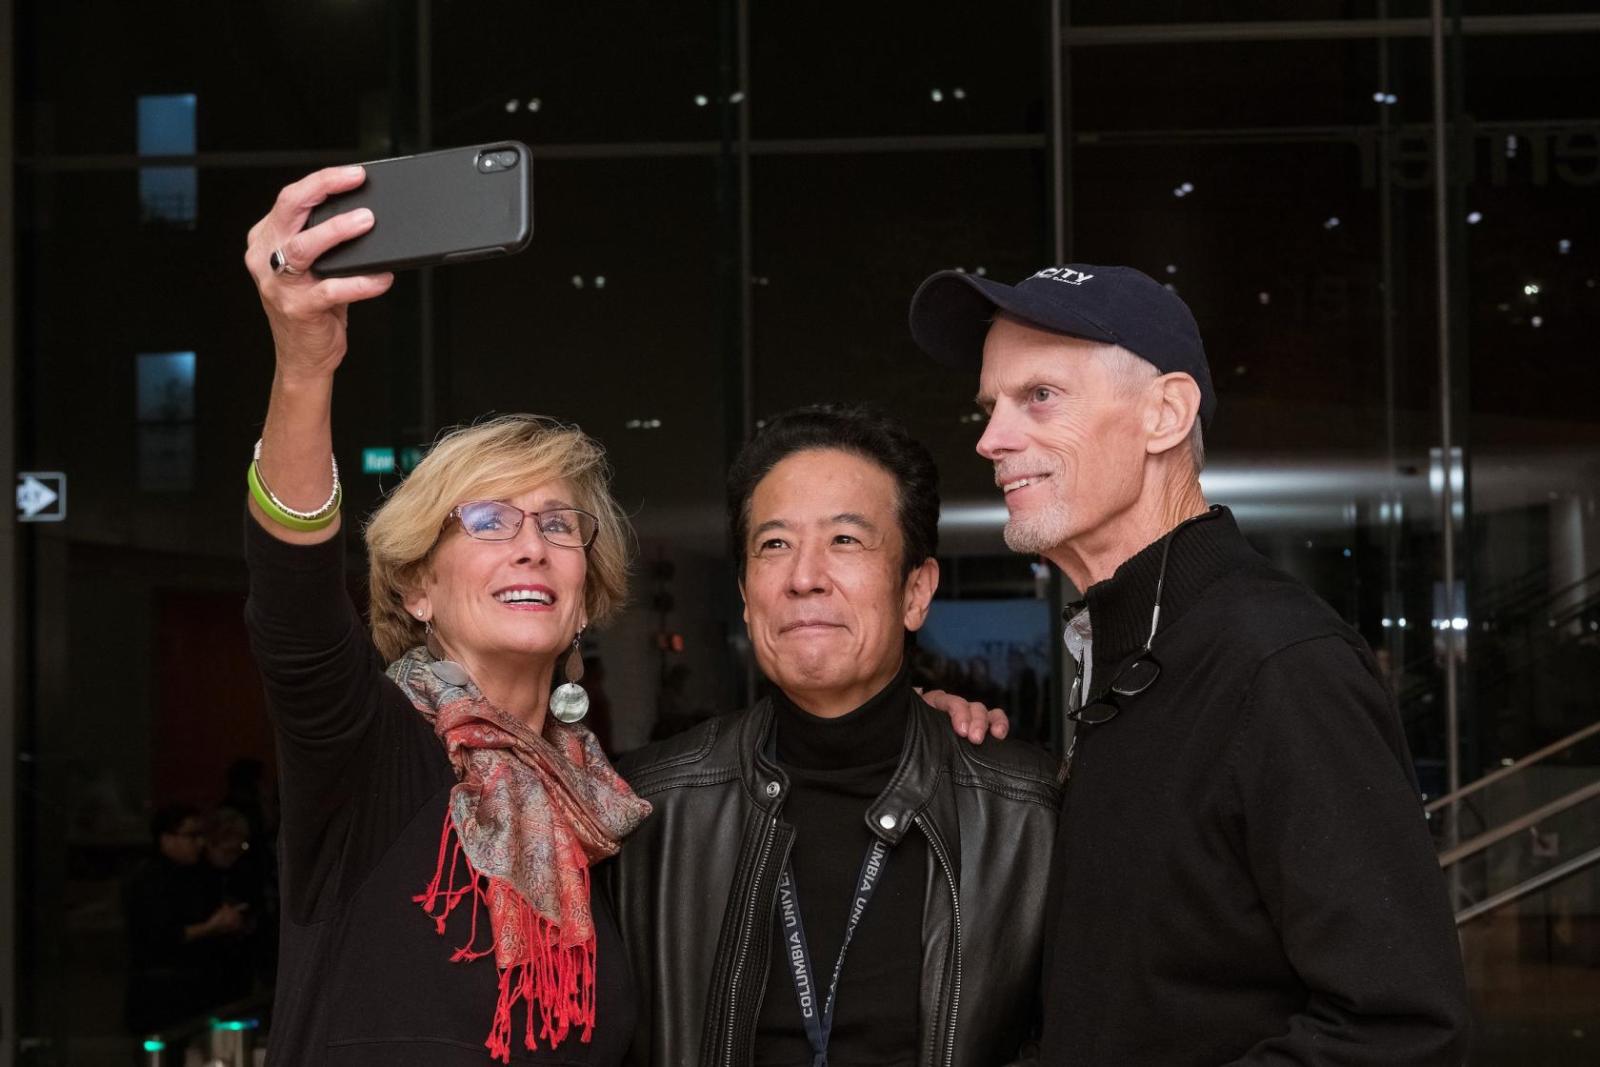 three people posing for a selfie